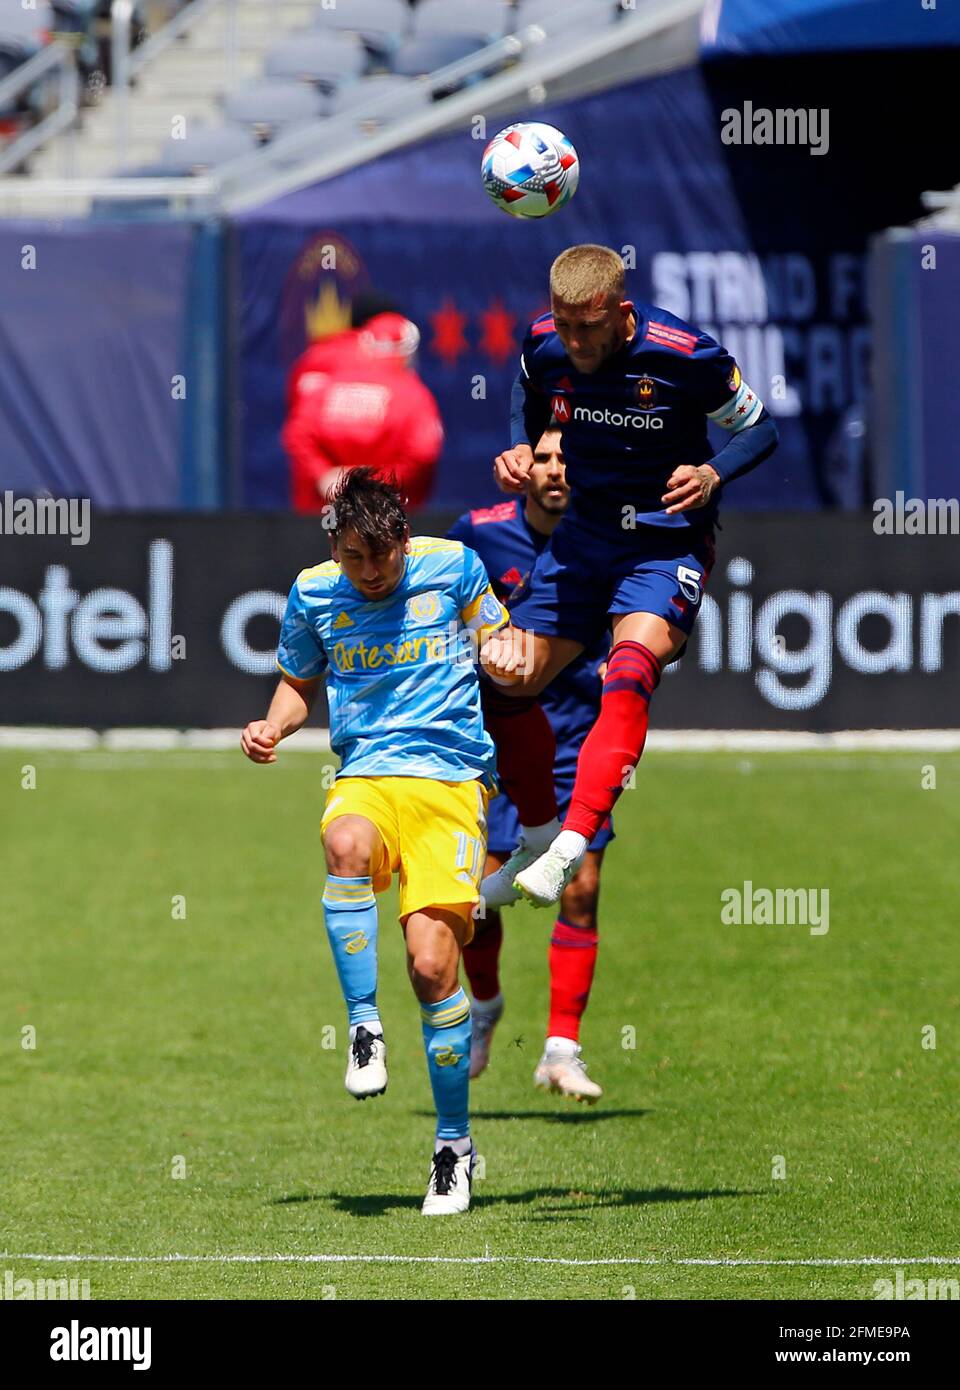 Chicago, USA, 08 May 2021. Major League Soccer (MLS) Chicago Fire FC defender Francisco Calvo (5) heads the ball against the Philadelphia Union at Soldier Field in Chicago, IL, USA. Union won 2-0. Credit: Tony Gadomski / All Sport Imaging / Alamy Live News Stock Photo